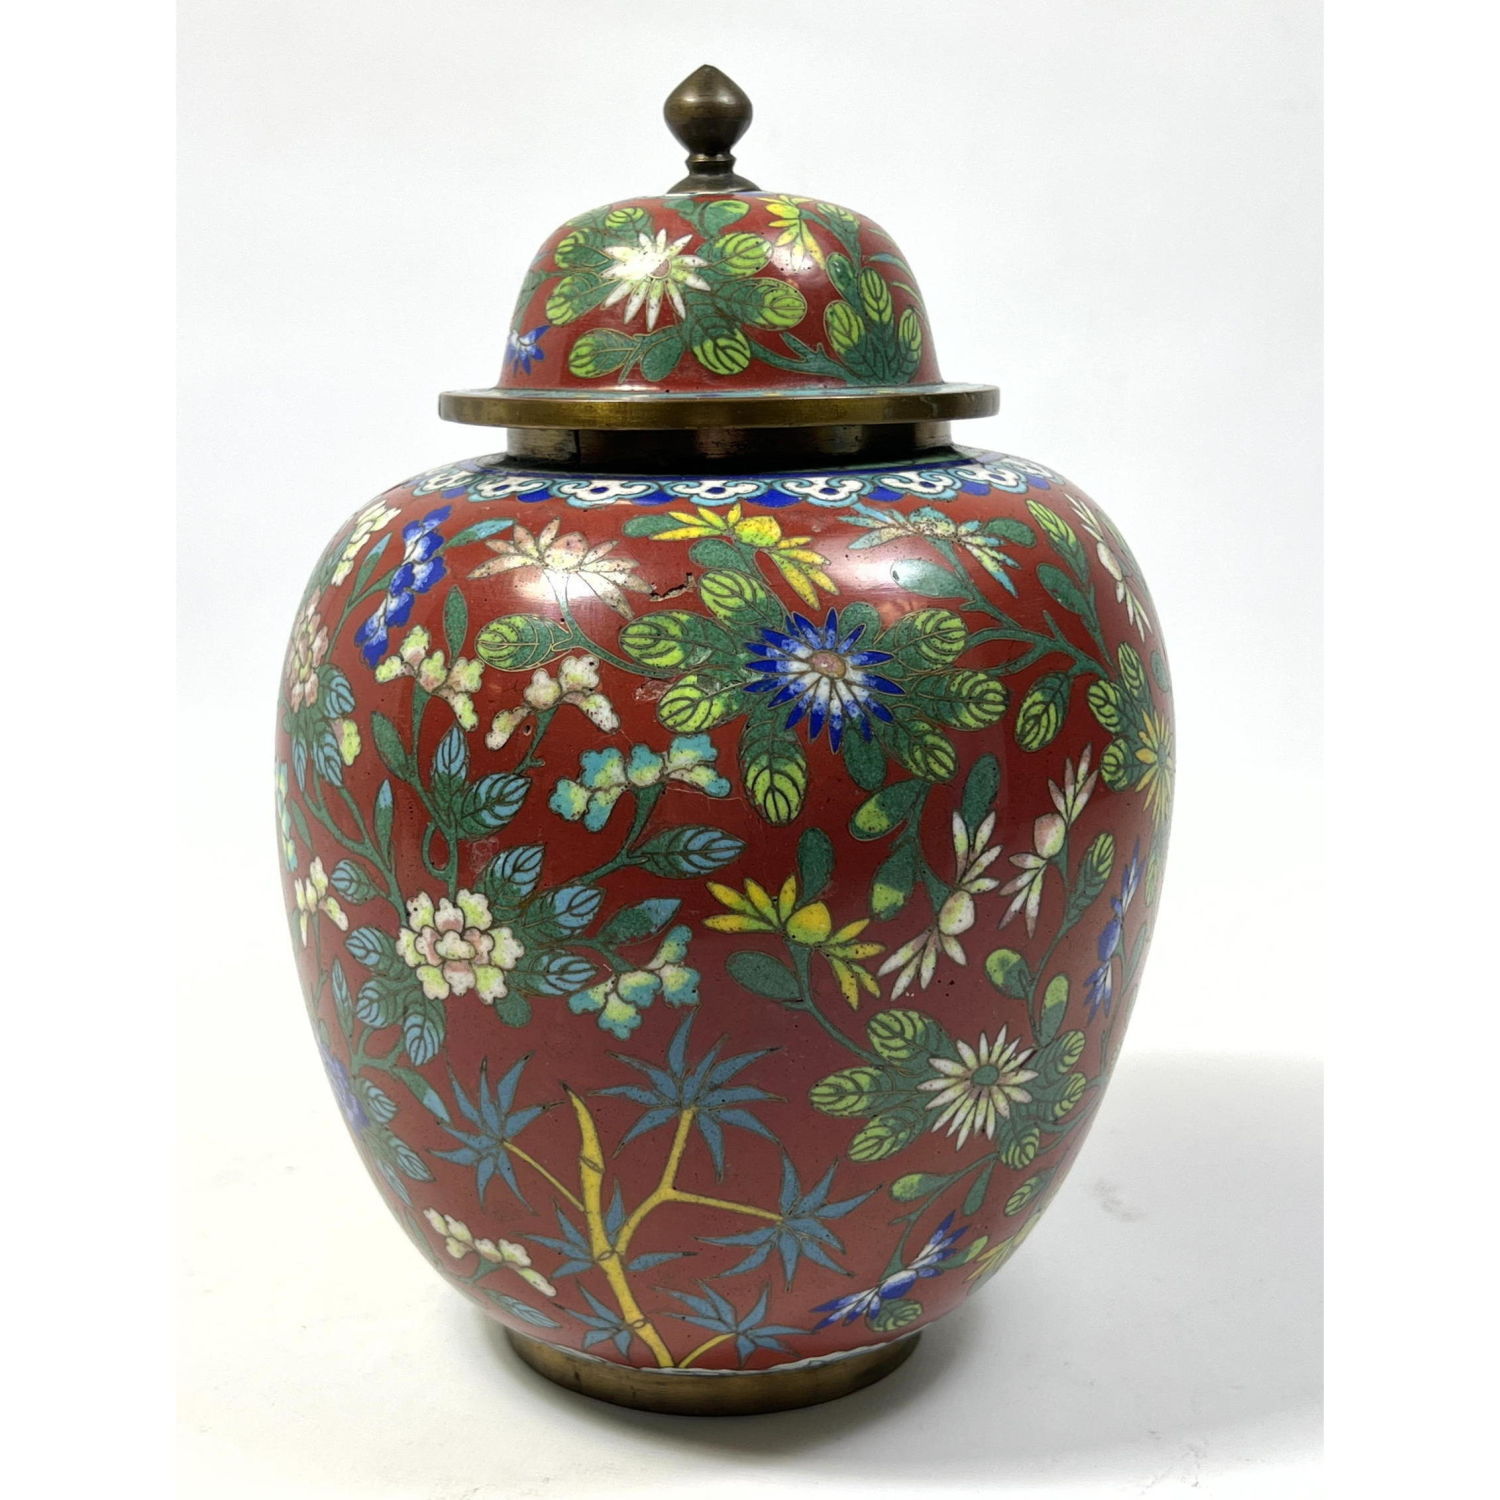 Cloisonne covered jar with lid.